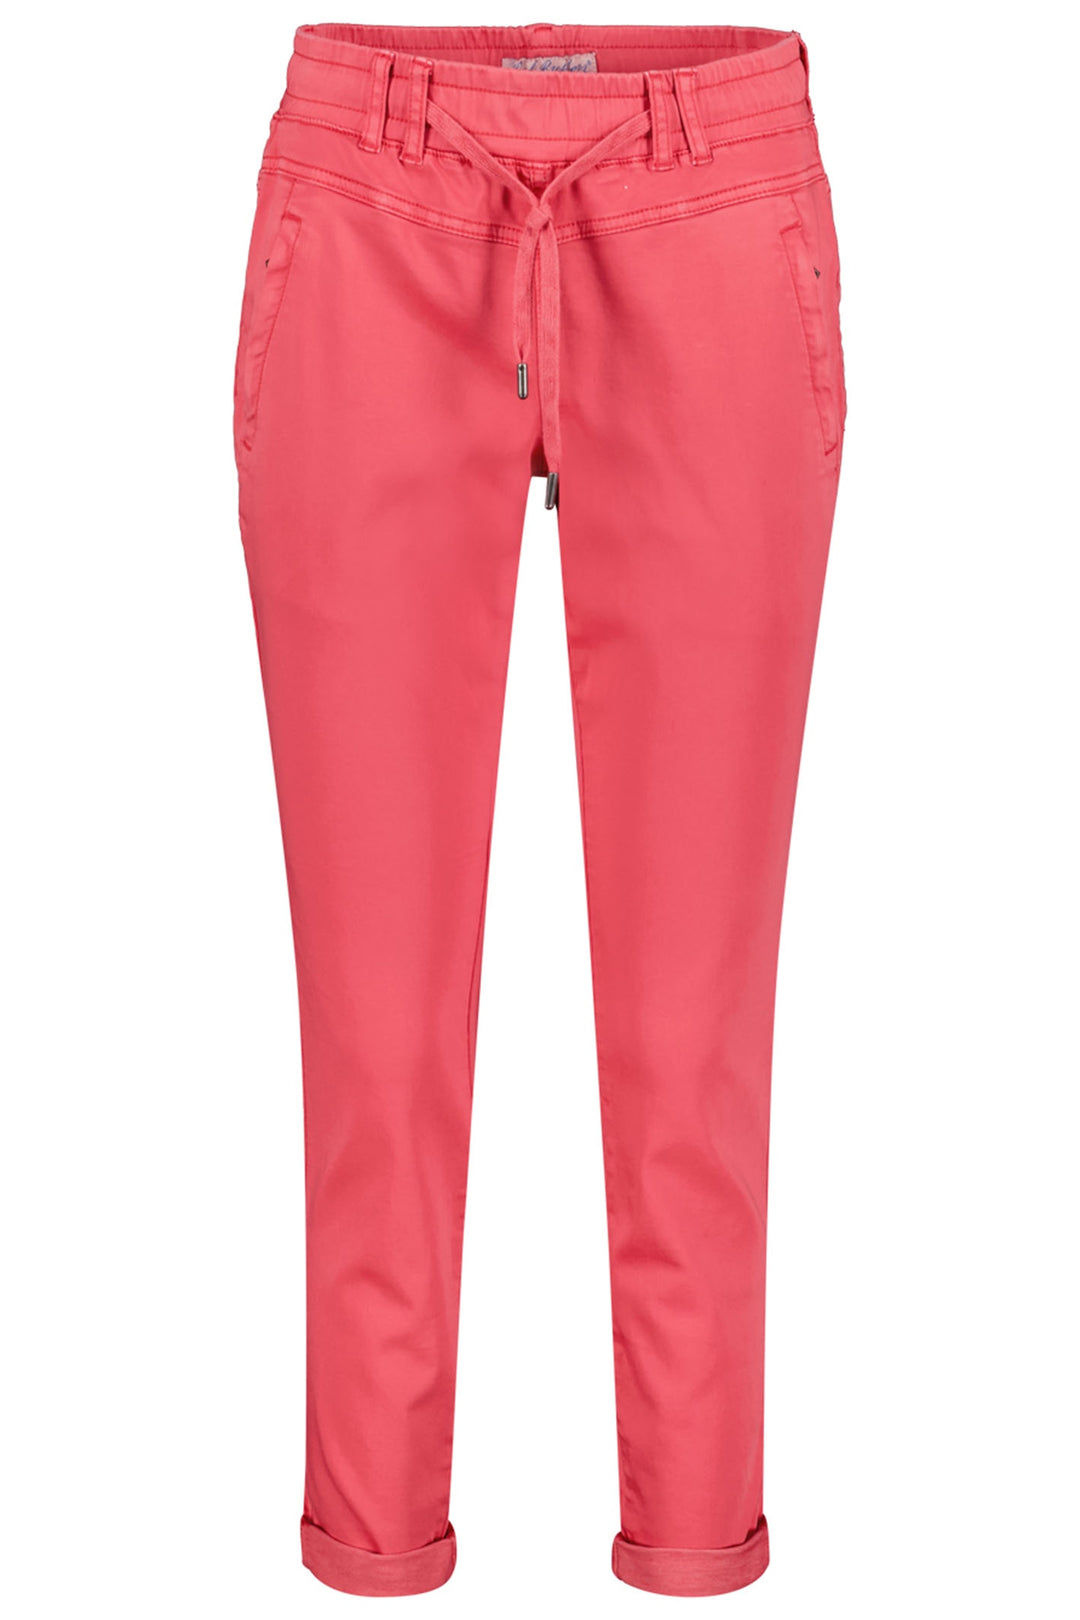 Red Button SRB4154 Tessy Coral Cropped Jogger Trousers - Dotique